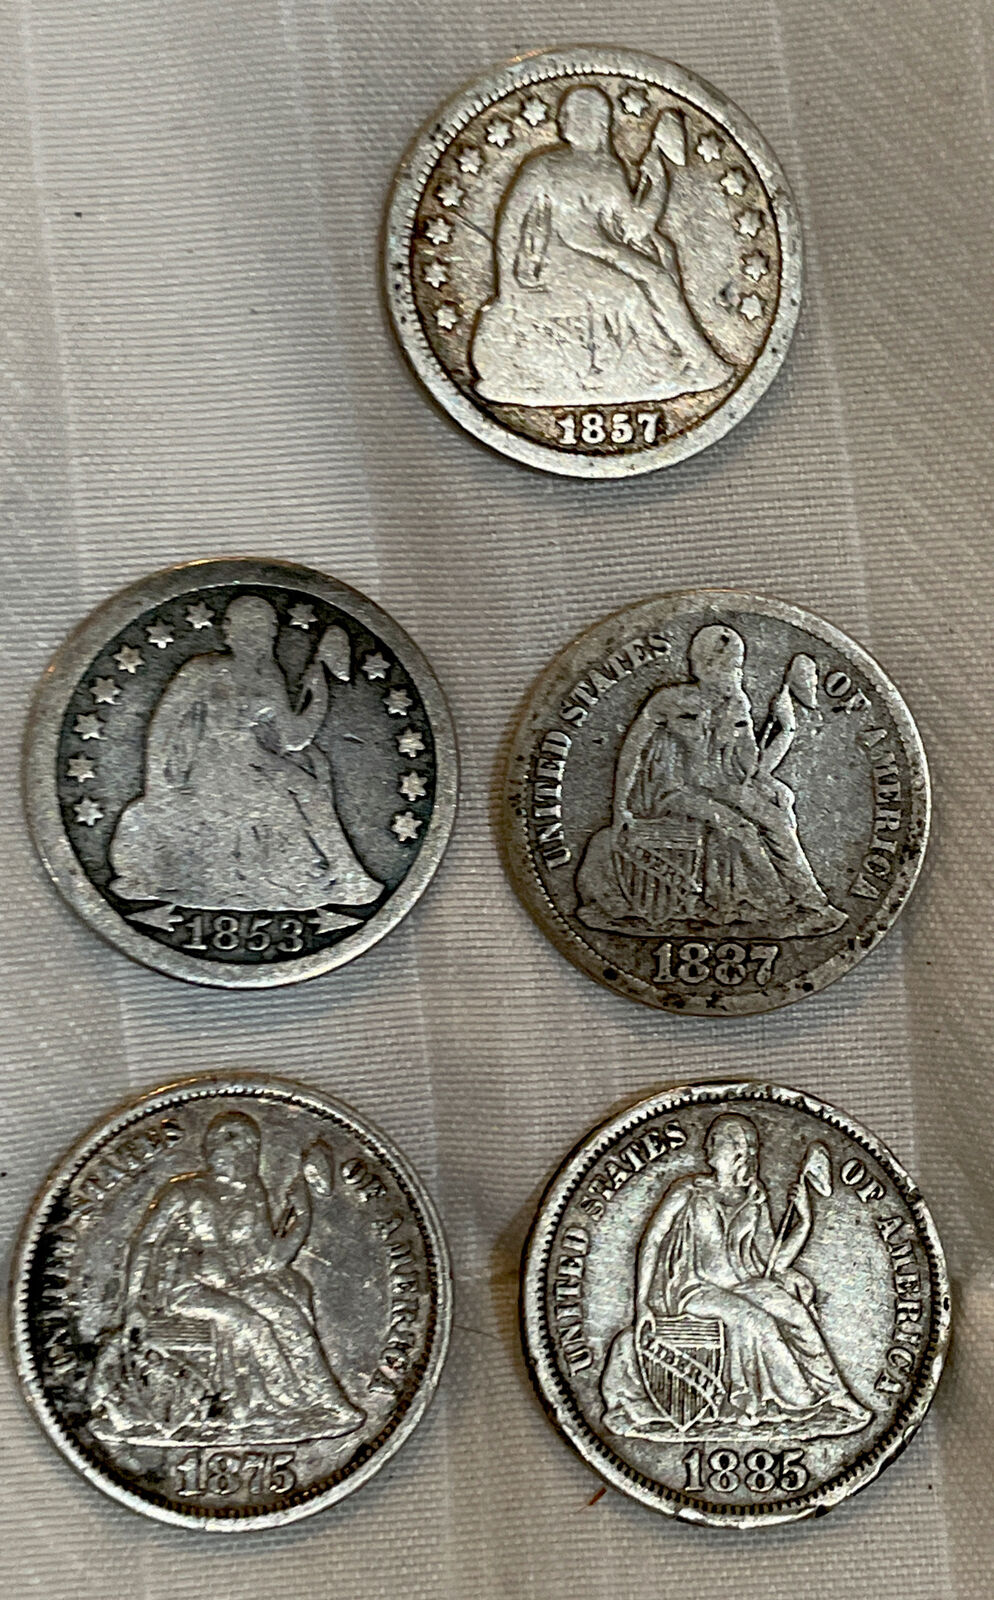 5 better quality seated liberty dimes: 1853, 1857, 1875, 1885, &1887s Great Deal